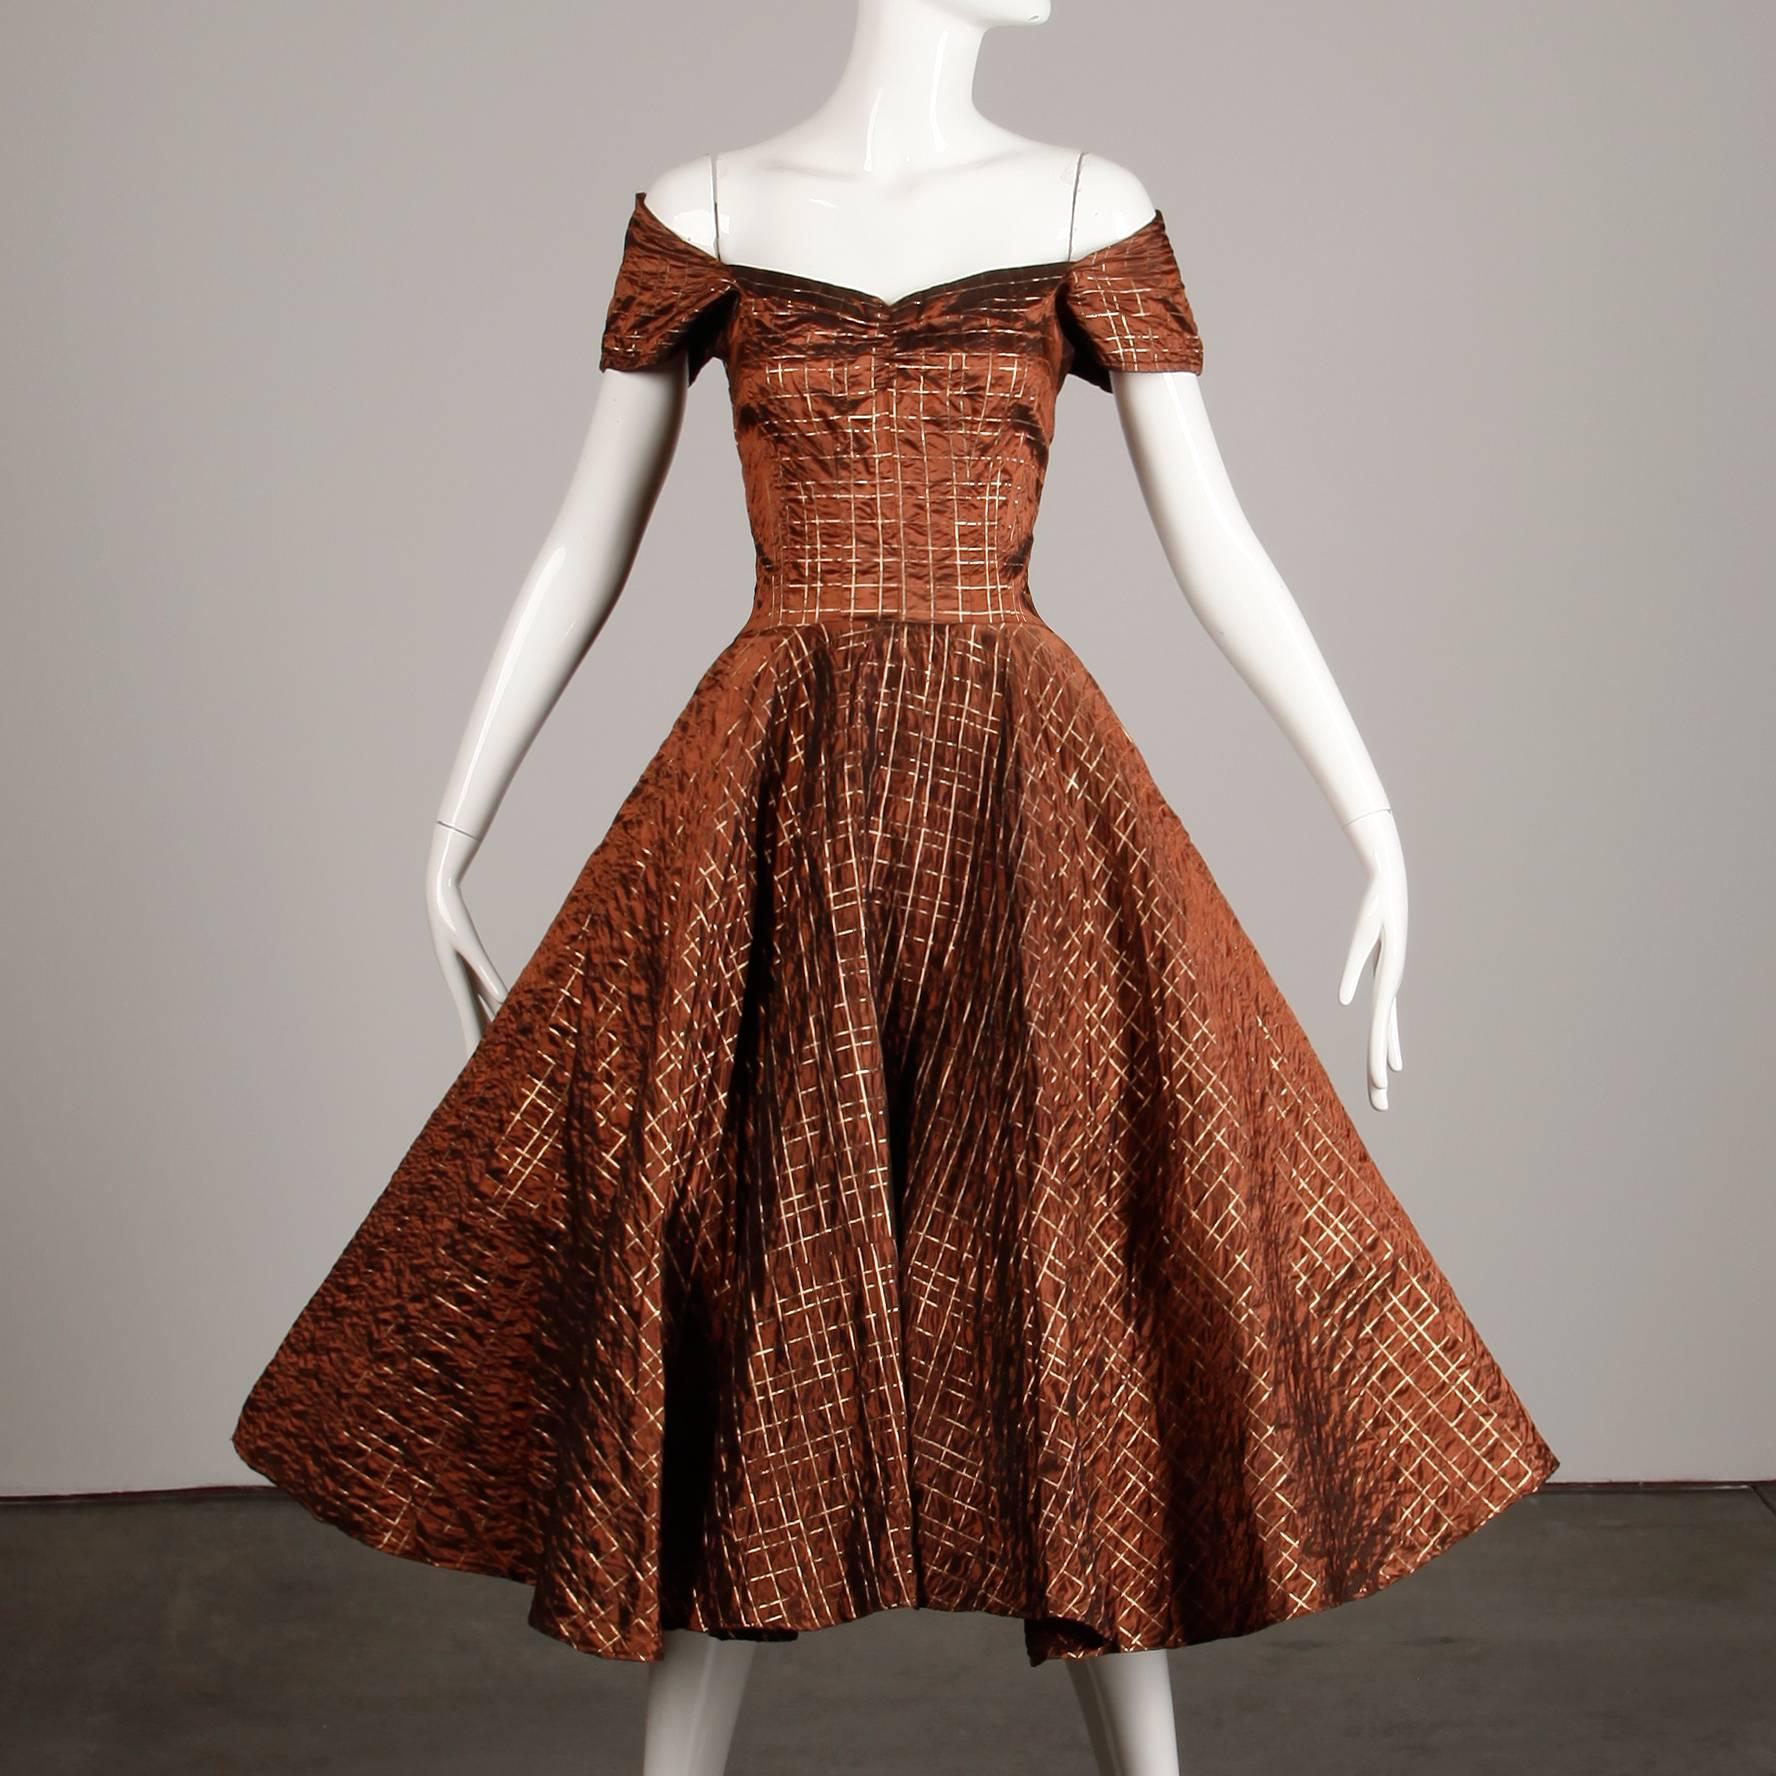 Chic 1950s vintage dress in a brown/ copper taffeta with metallic plaid embroidery and full circle sweep. Unlined with rear metal zip closure. Fits like a modern XS-S. The bust measures 32